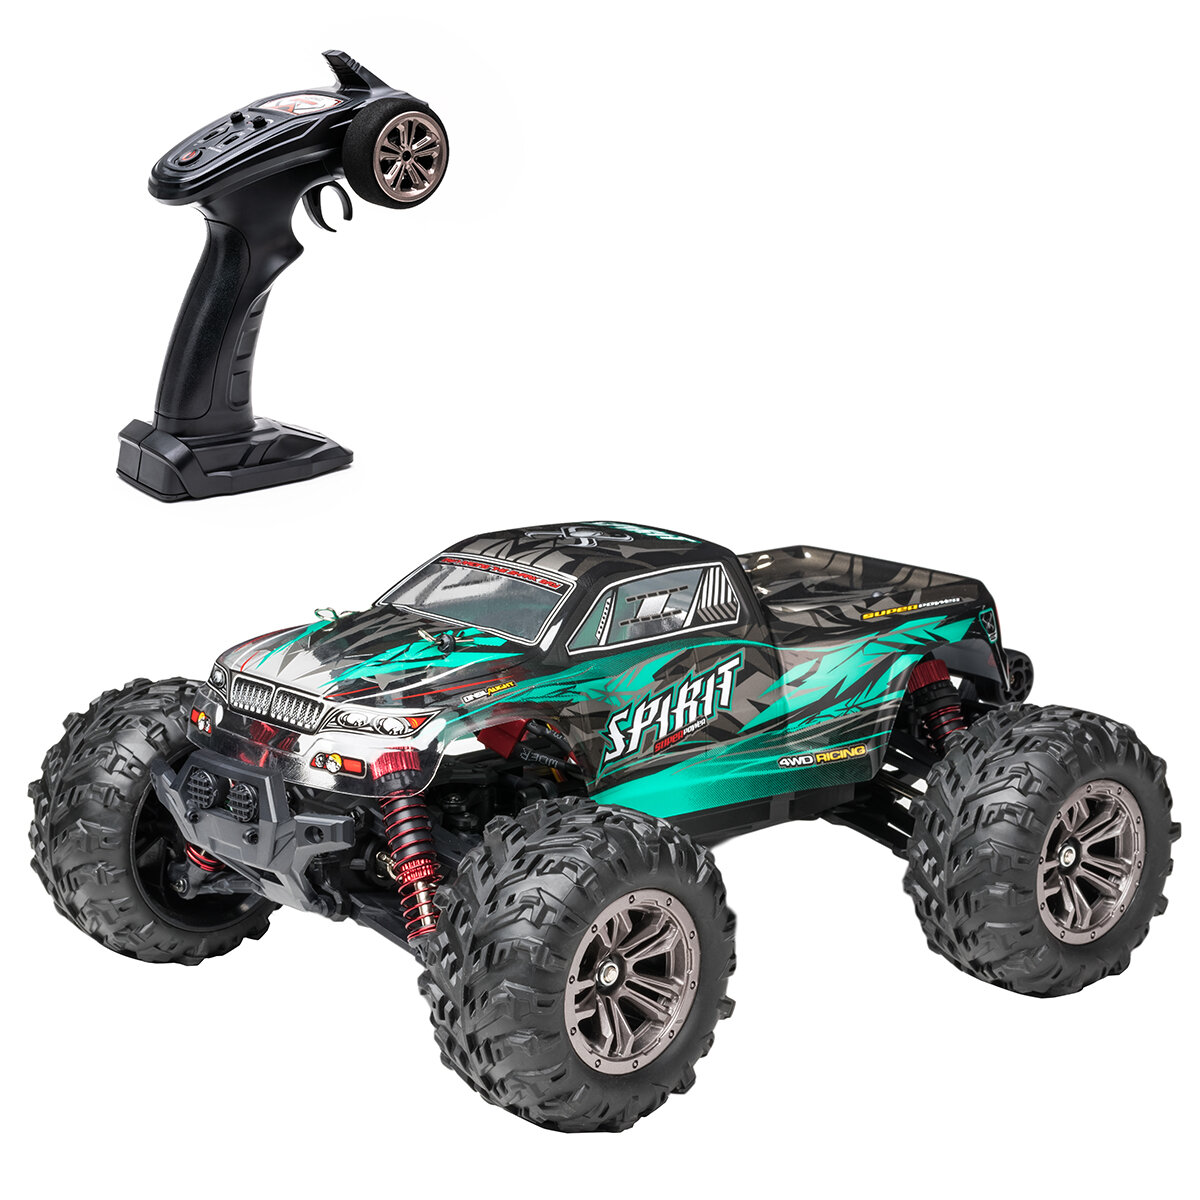 FLYHAL Q901 Pro 1/16 Rc Car Blushless Motor 62KM/H High Speed Drift 4WD Remote Control Truck All Terrain for Adults and